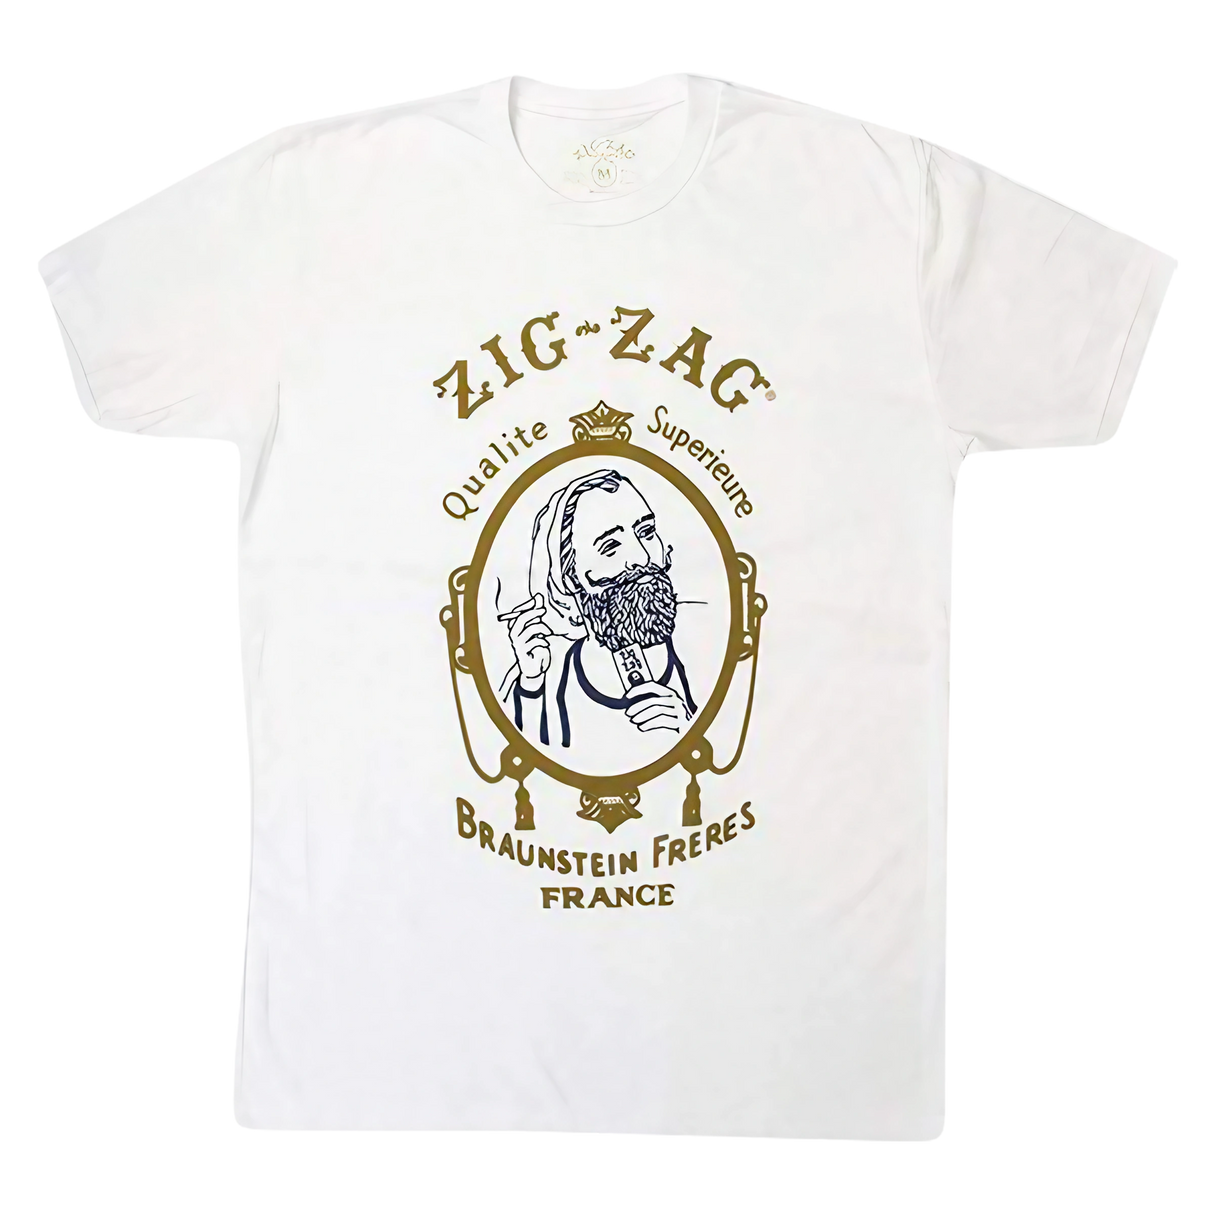 Zig Zag T-Shirt in White featuring iconic logo, front view on seamless background, cotton blend, unisex size